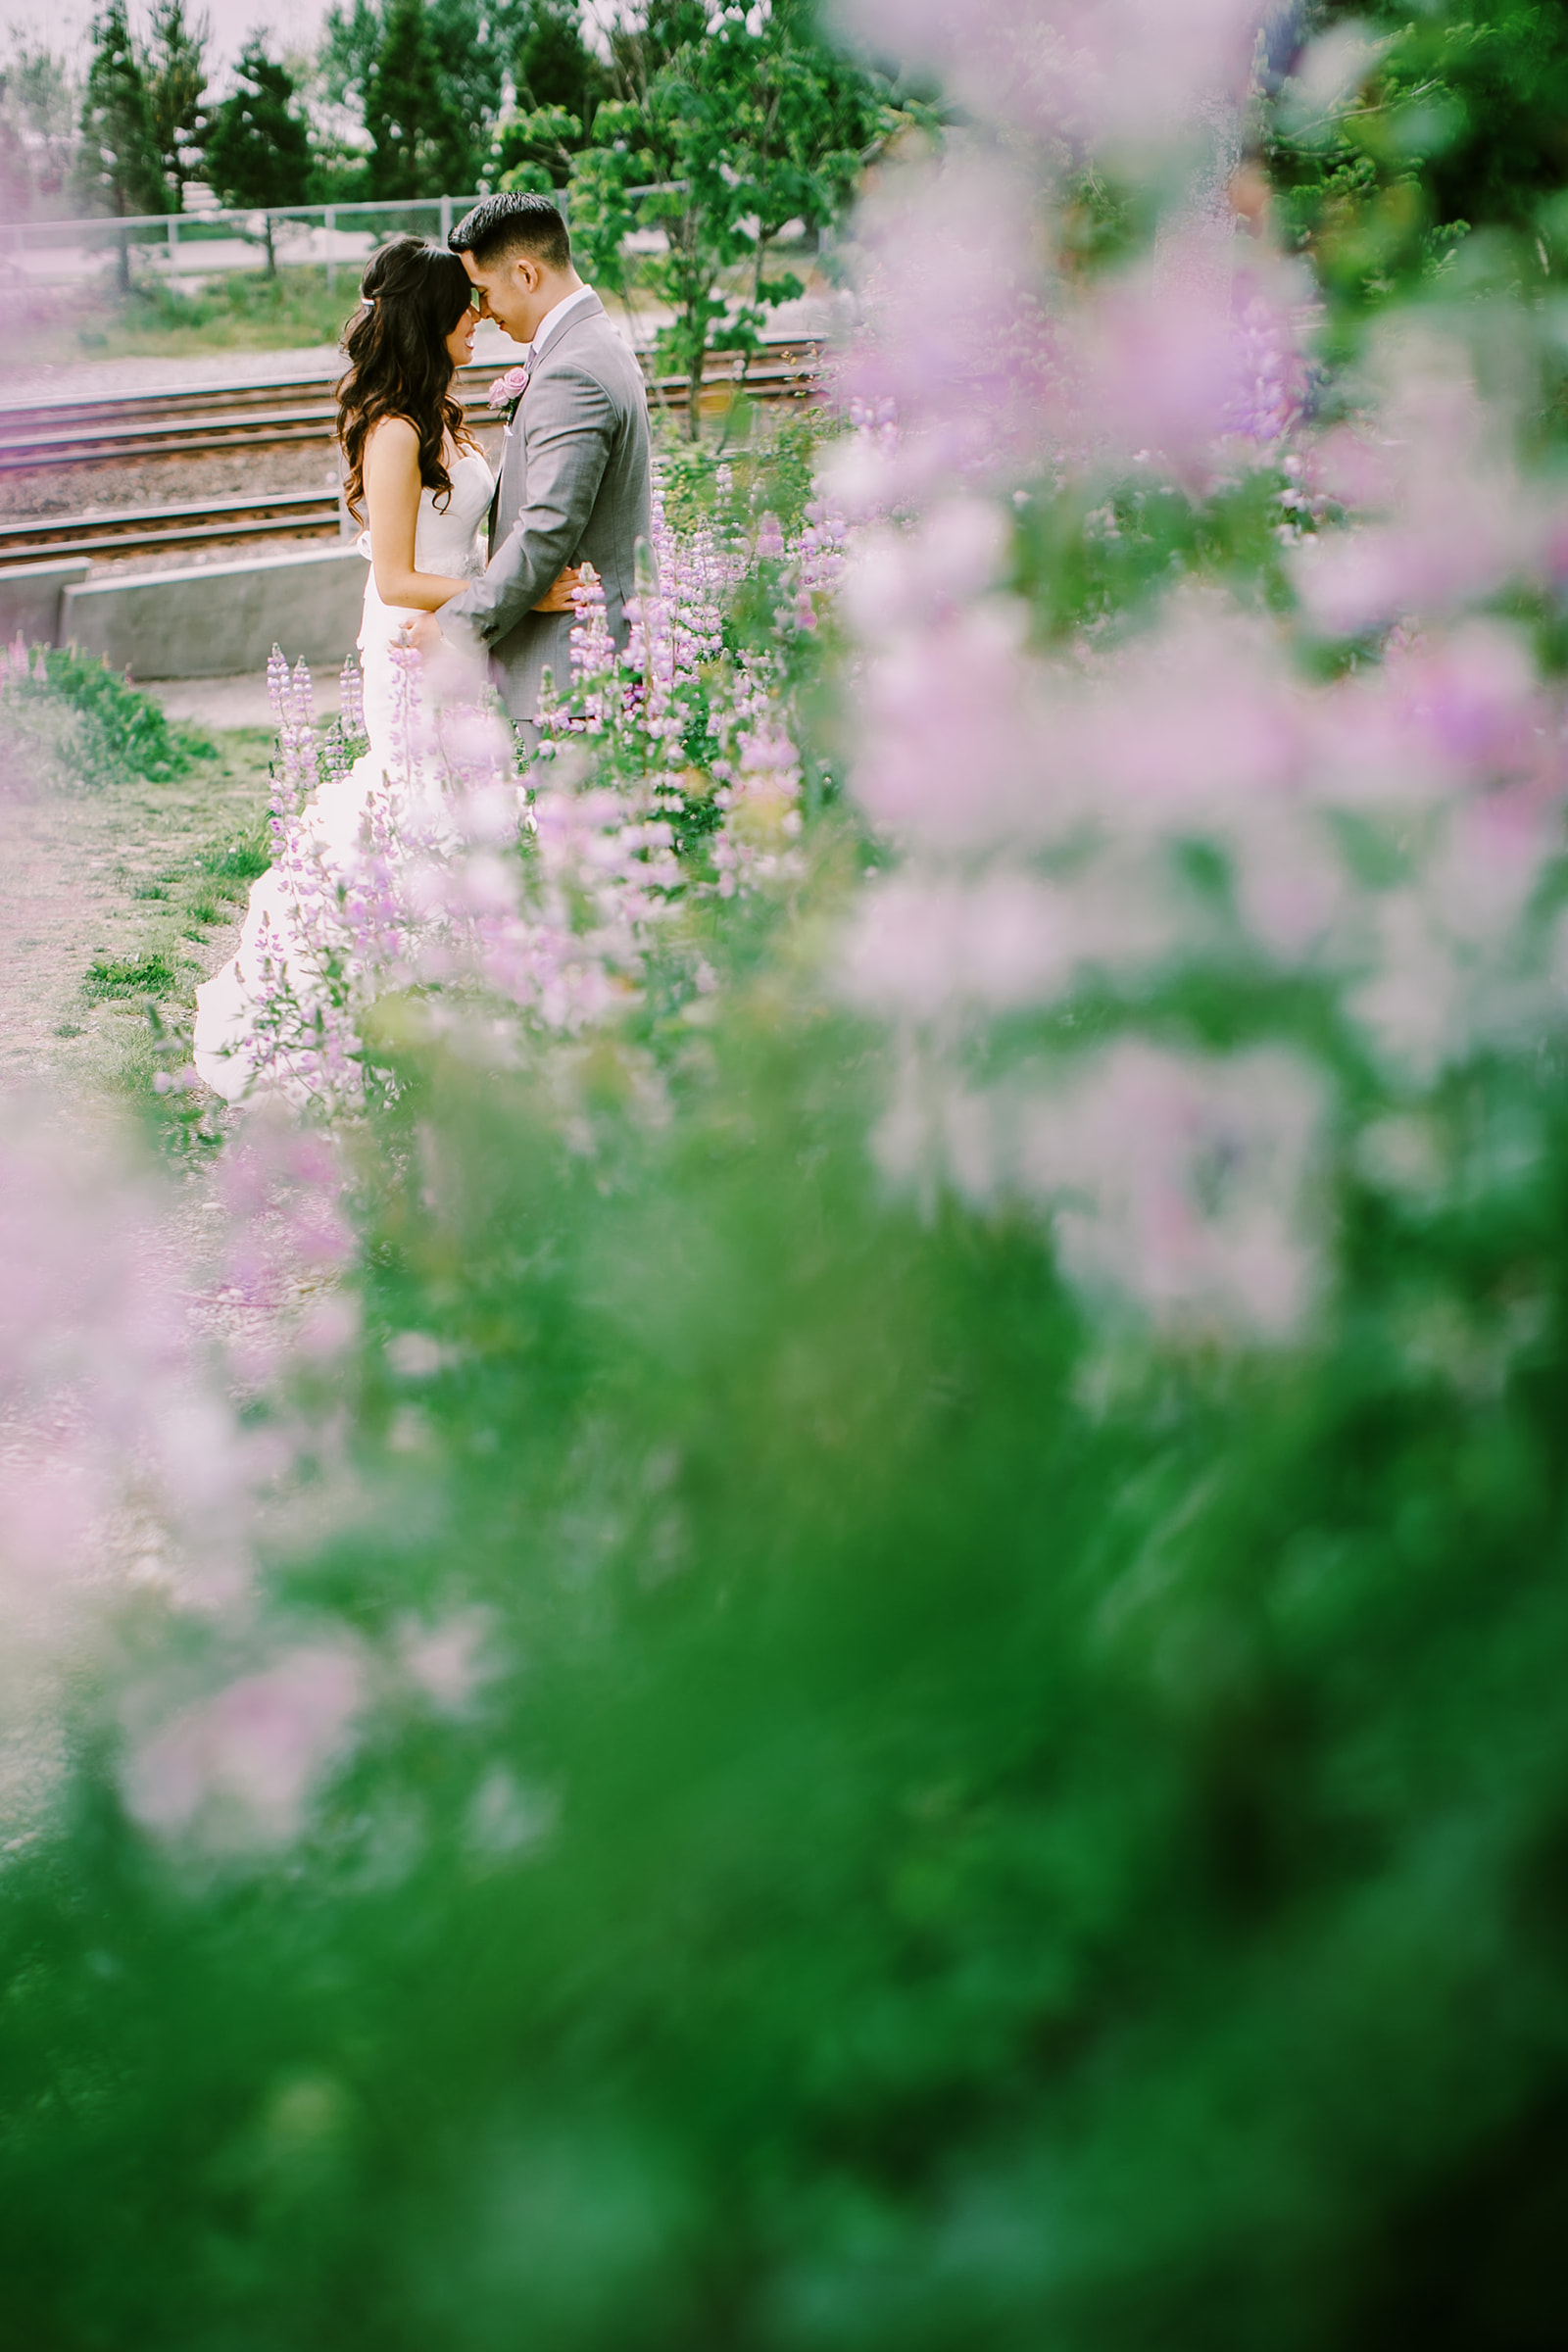 Bride and groom wedding portraits at the Olympic Sculpture Park summer with larkspurs growing